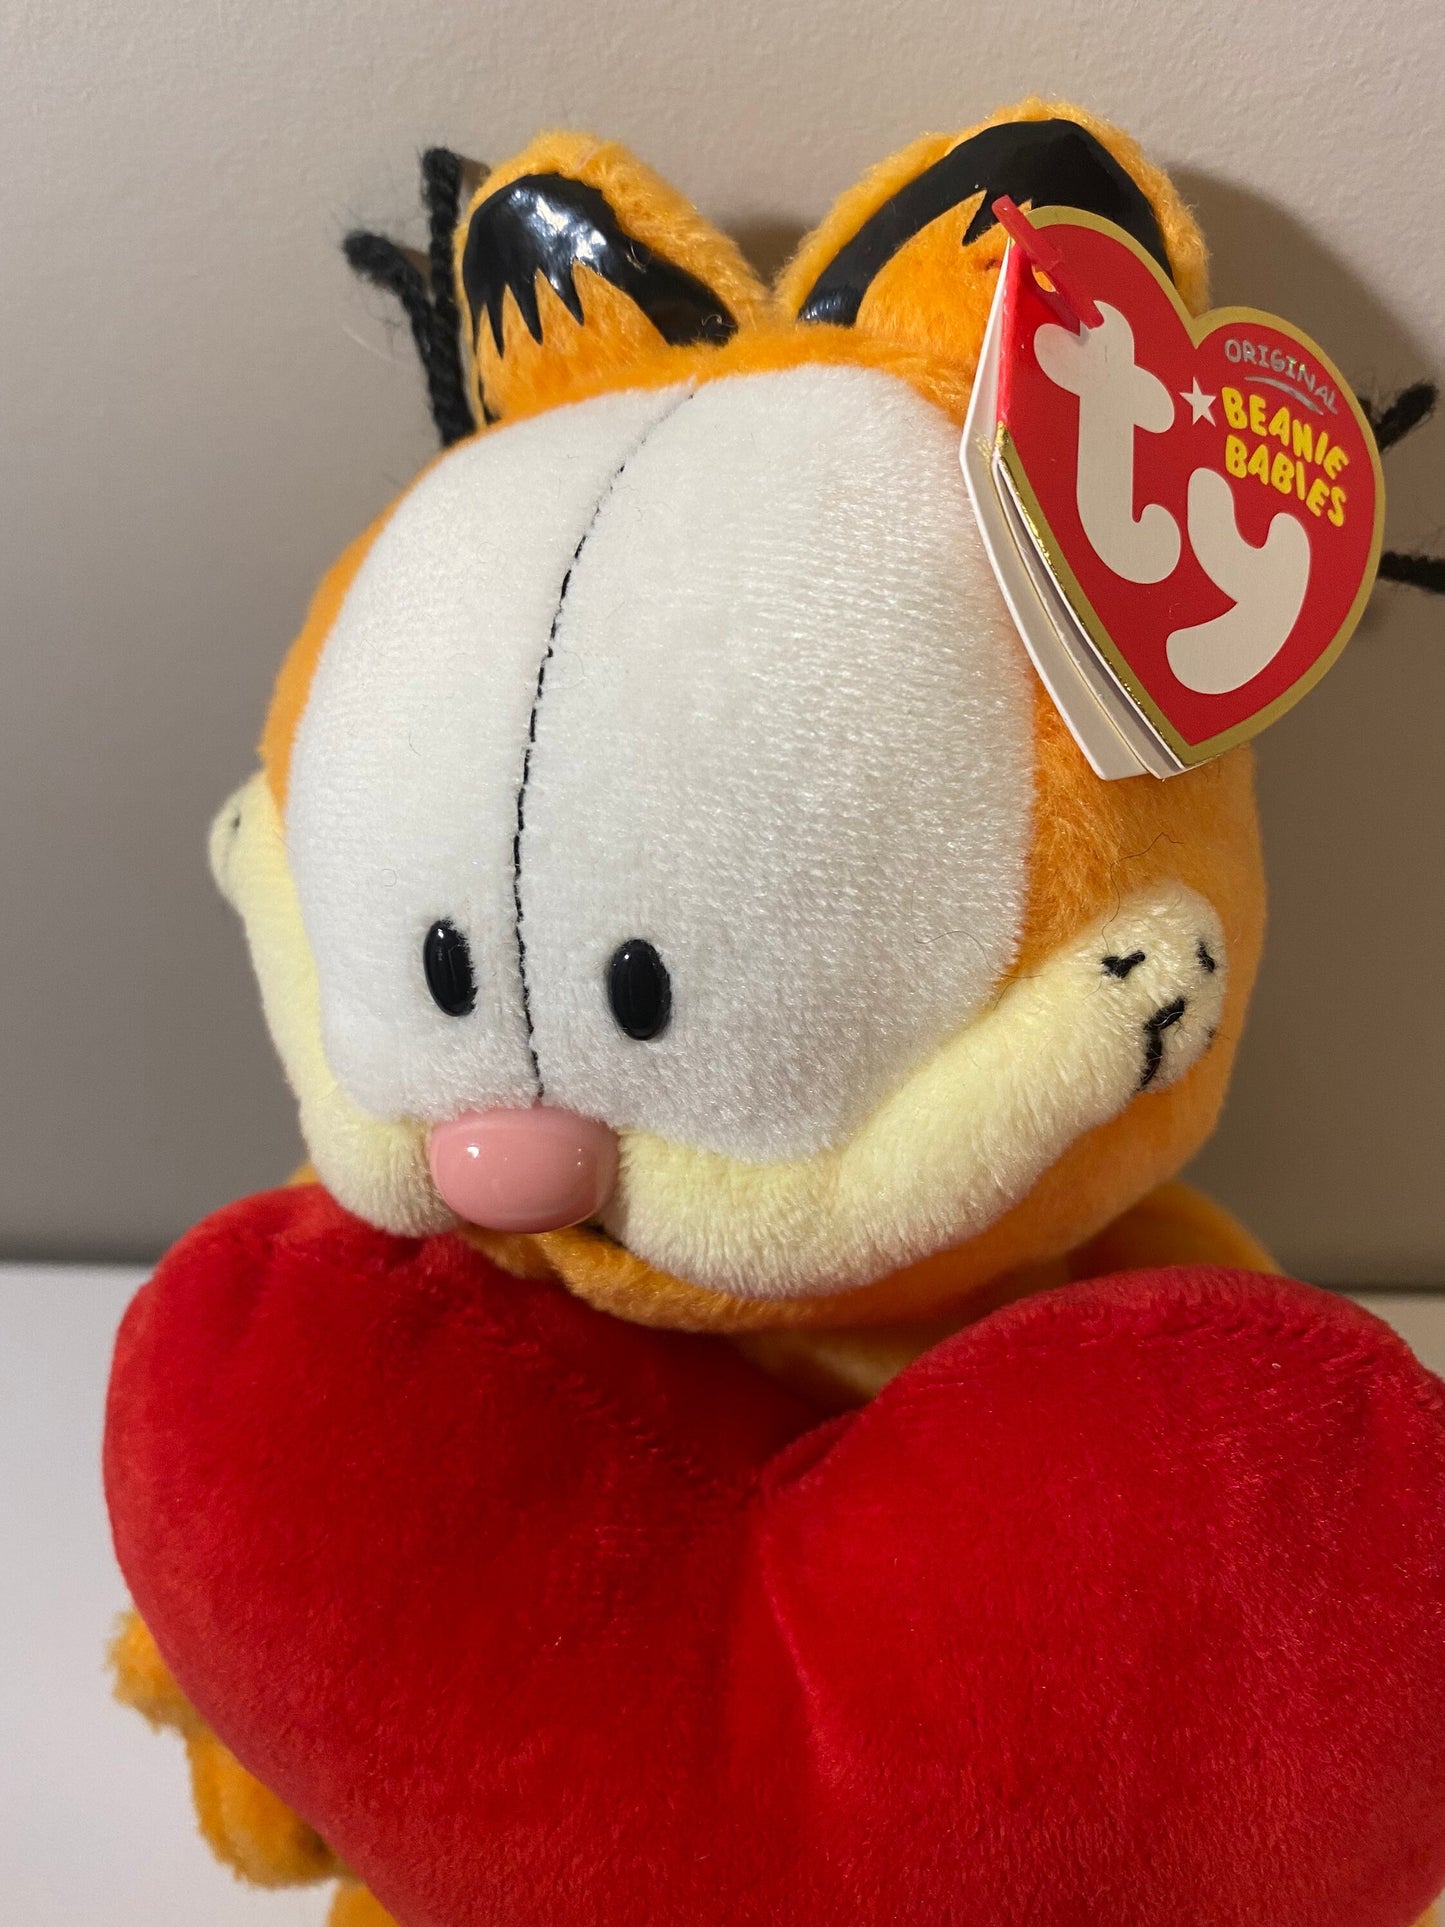 TY Beanie Baby “Garfield” the Cat Holding a Big Red Heart! (9.5 inch)